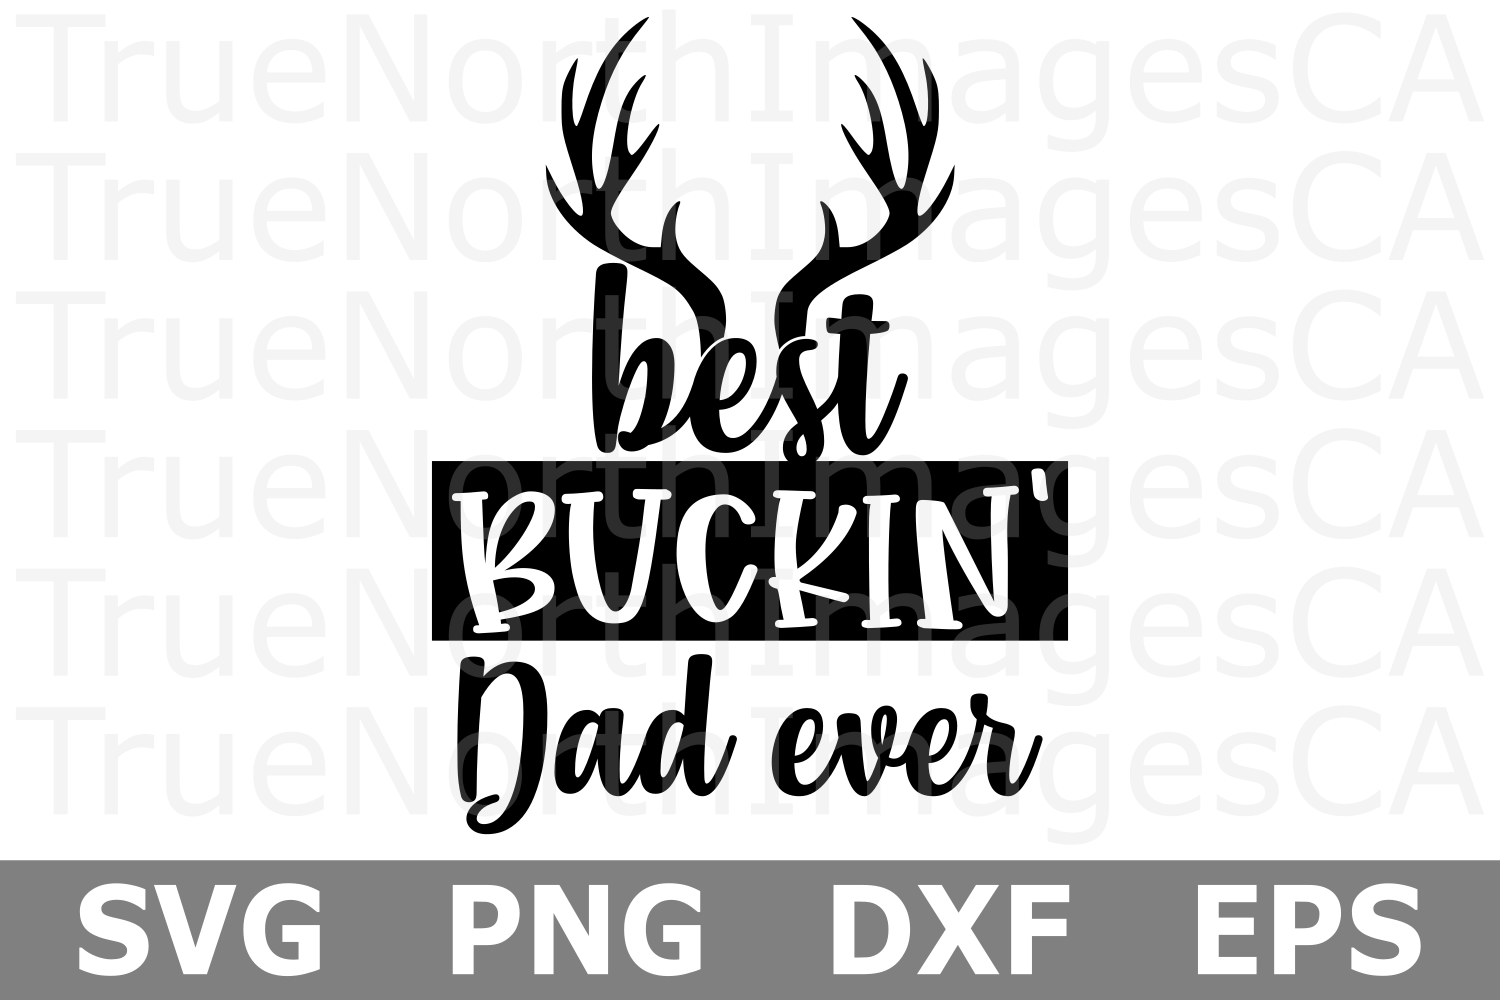 Best Buckin Dad Ever - A Fathers Day SVG Cut File